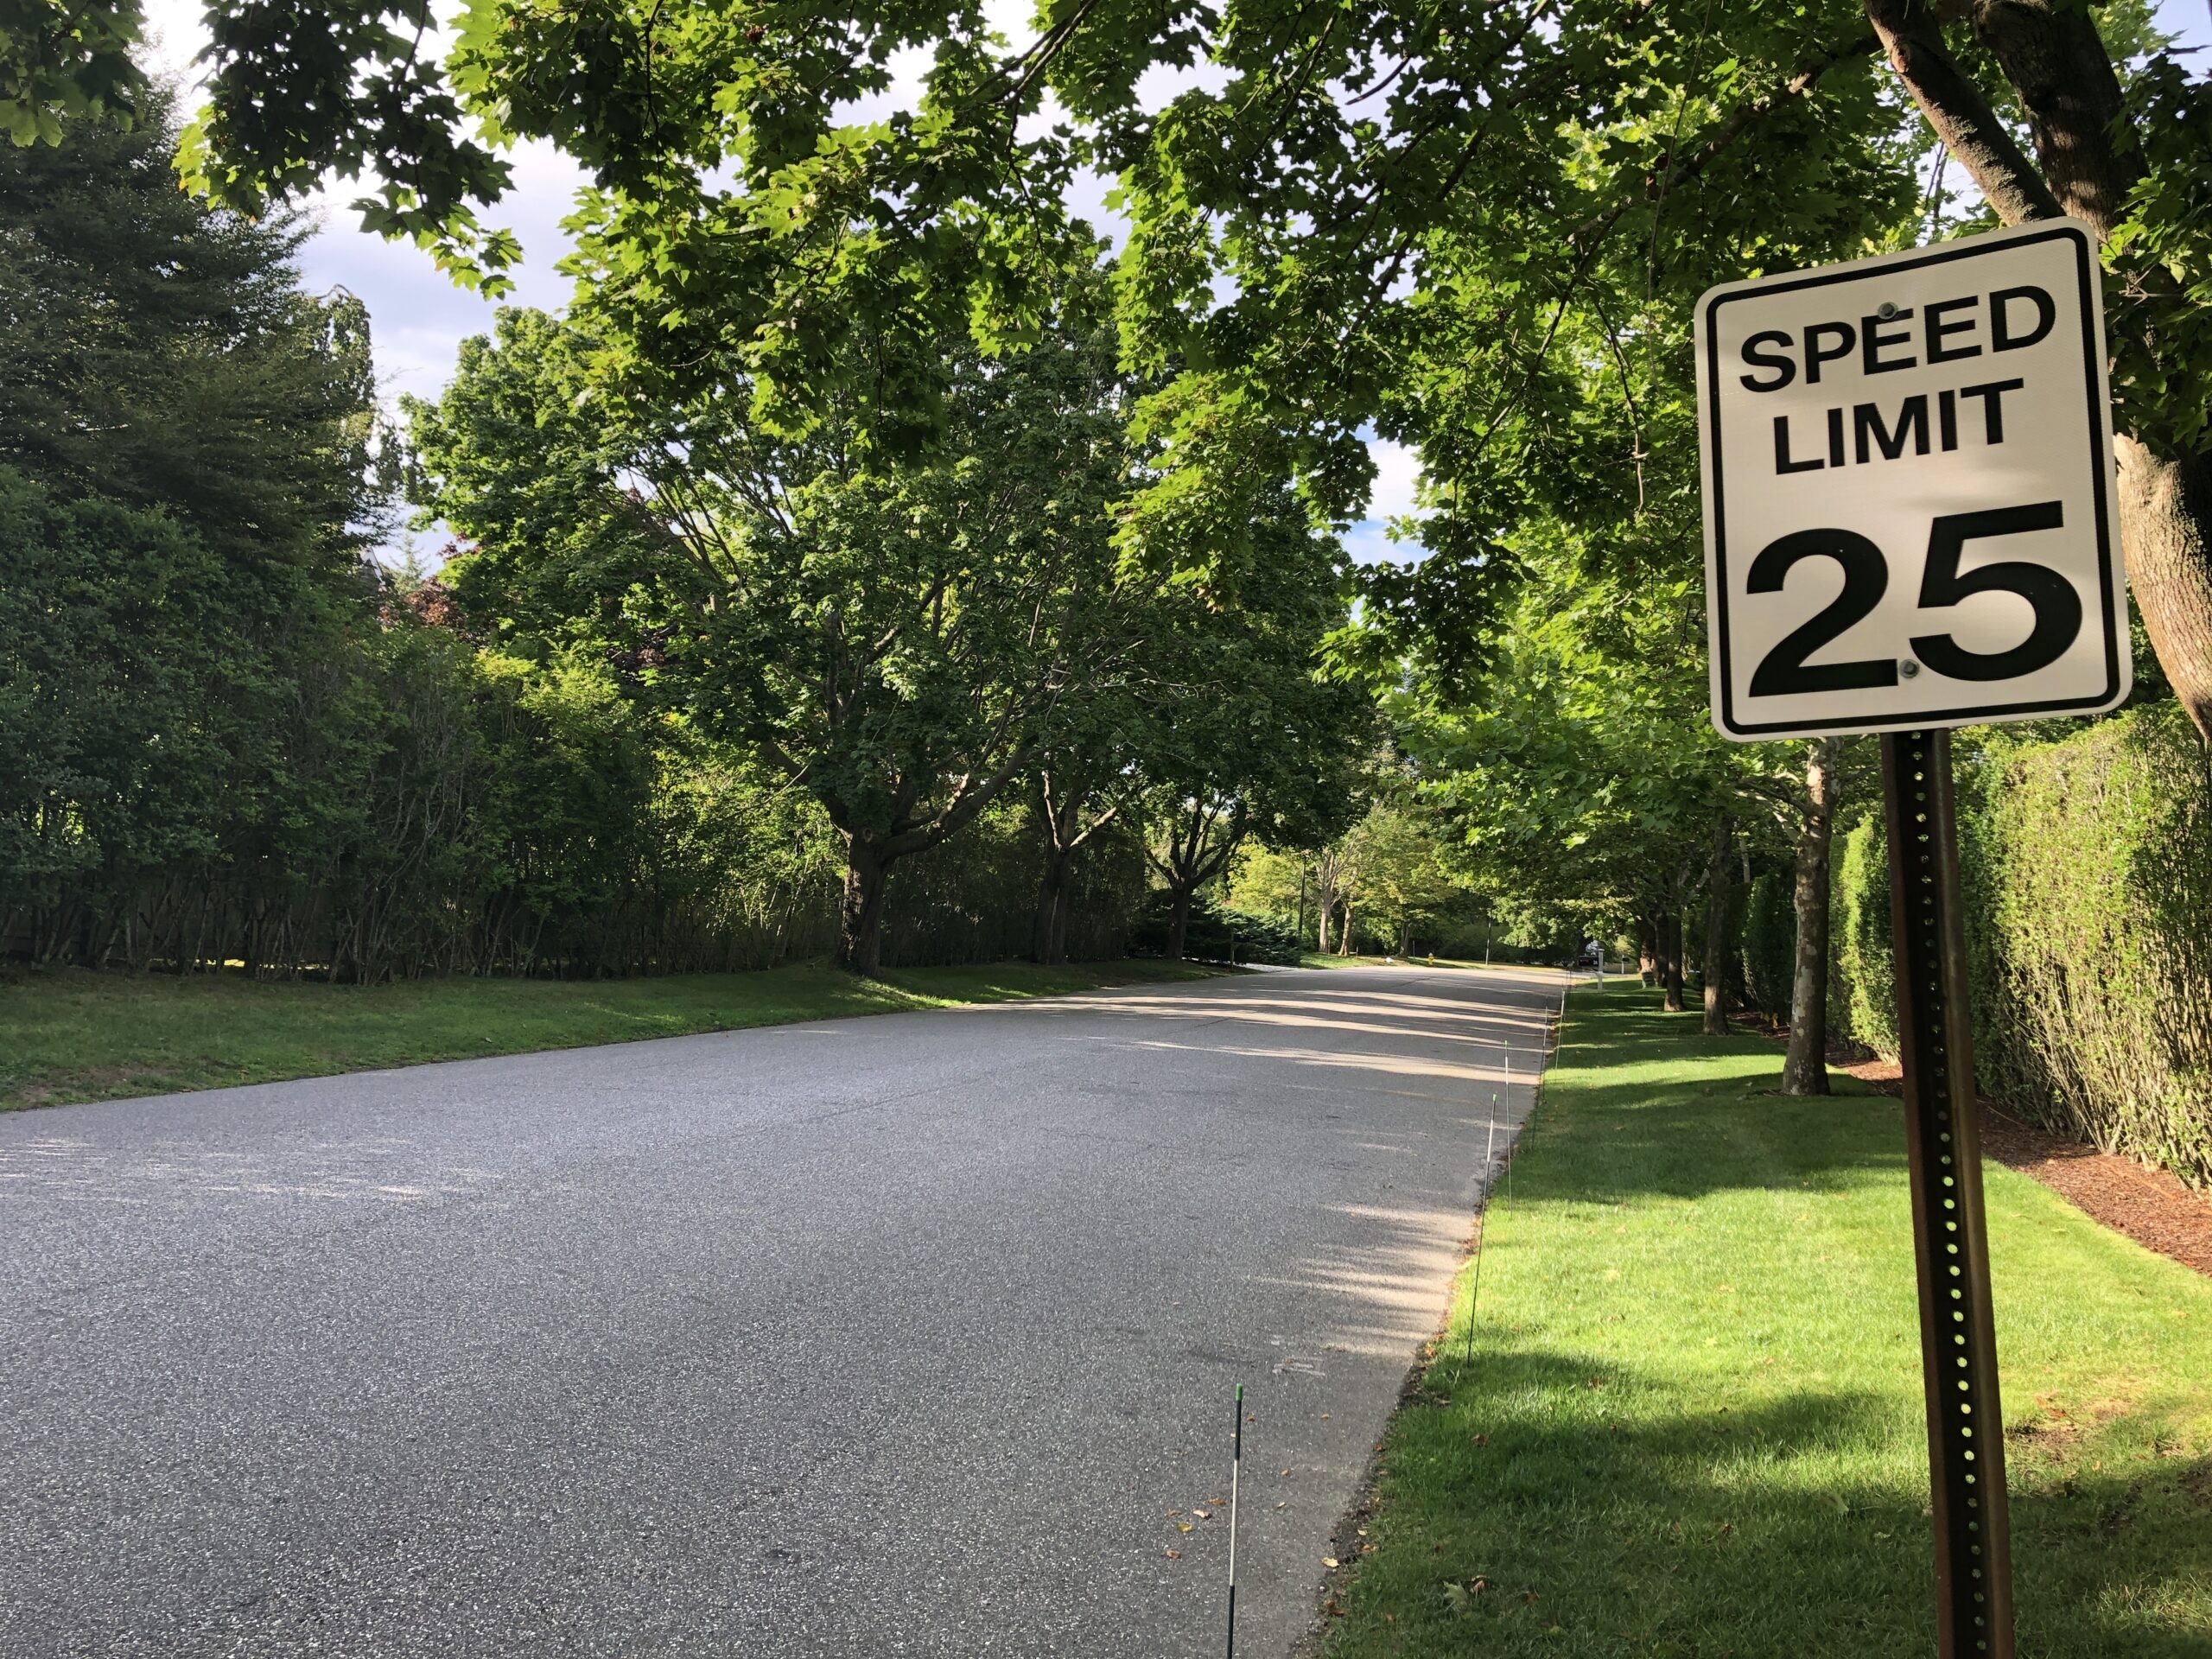 A pilot program that will launch on October 1 in Southampton Village is an attempt to address traffic issues that have been frustrating residents, particularly those who live on side streets in the village. CAILIN RILEY